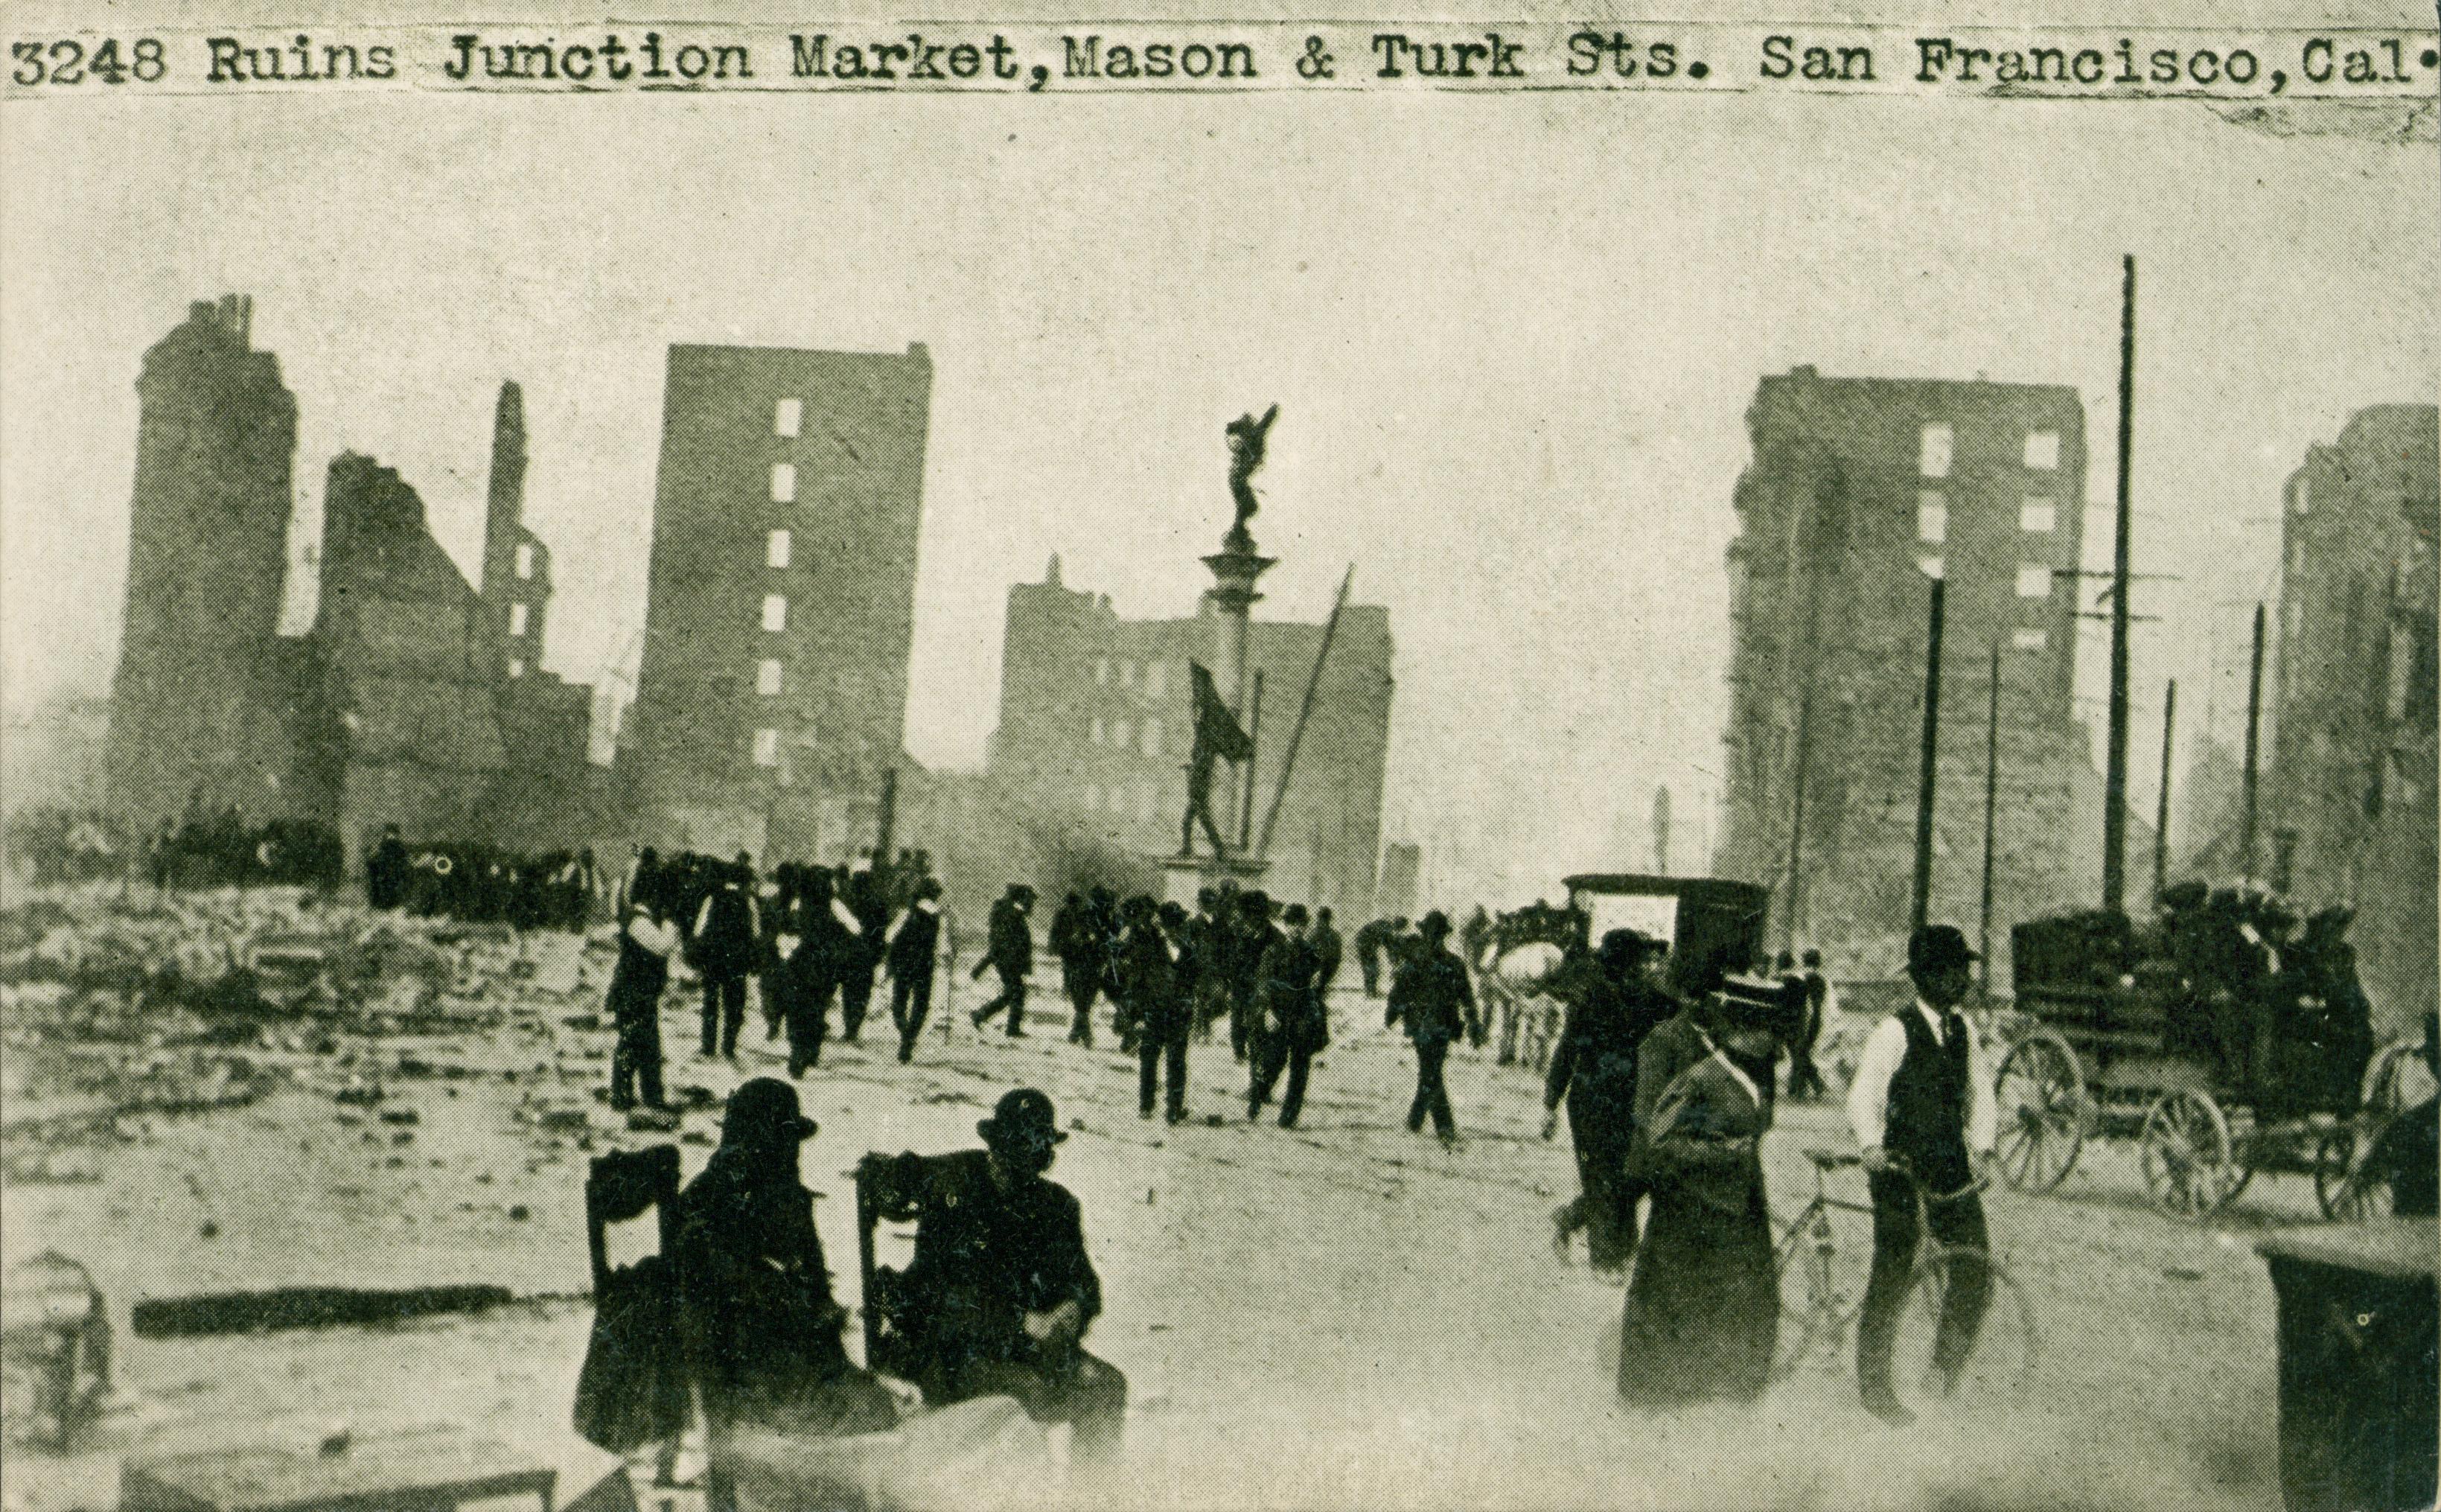 Shows crowds of people walking along streets with ruined buildings in the background.